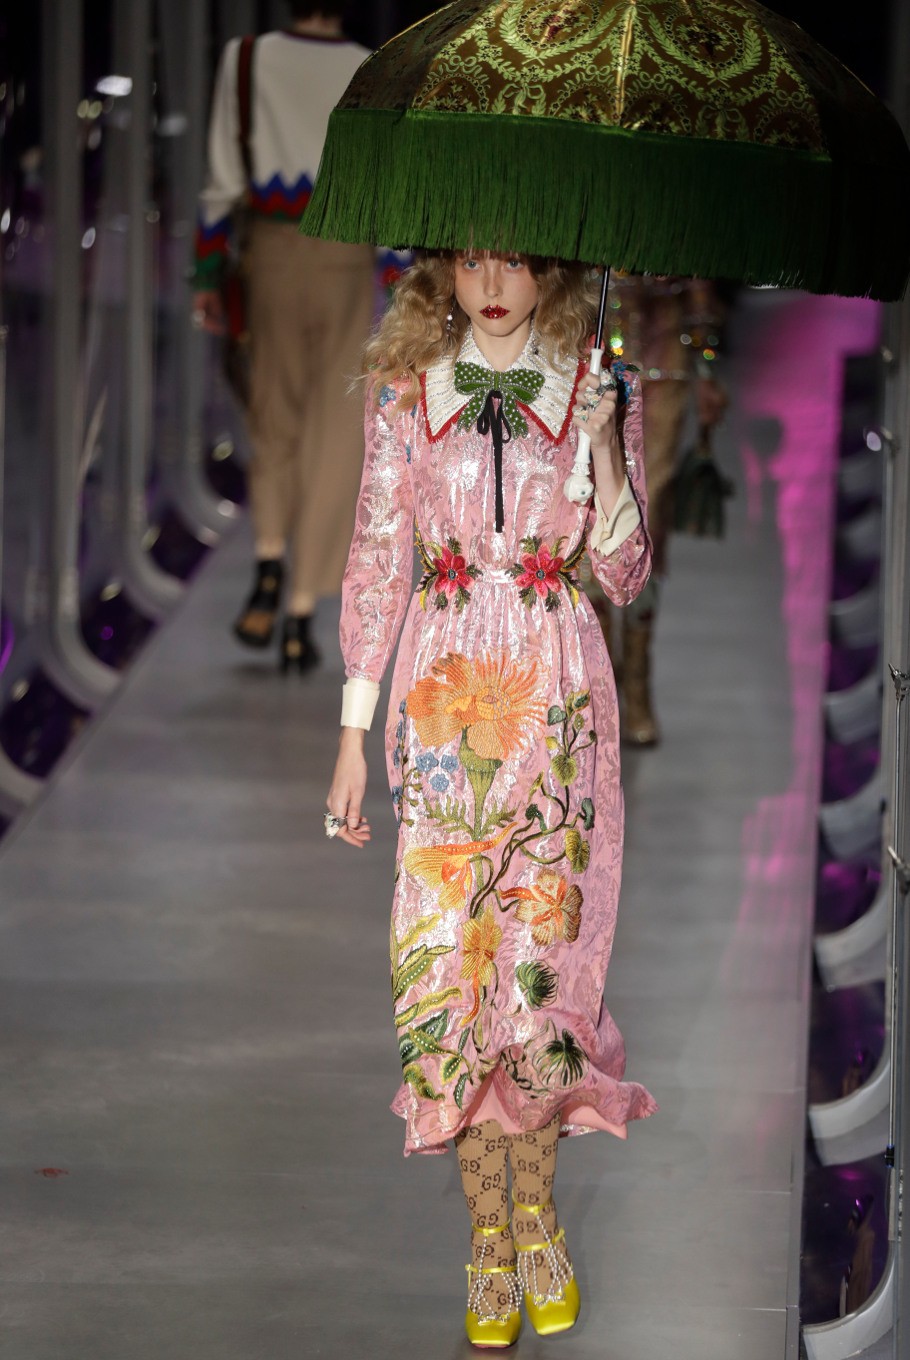 Gucci presents otherworldly collection in Milan - Lifestyle - The Jakarta Post